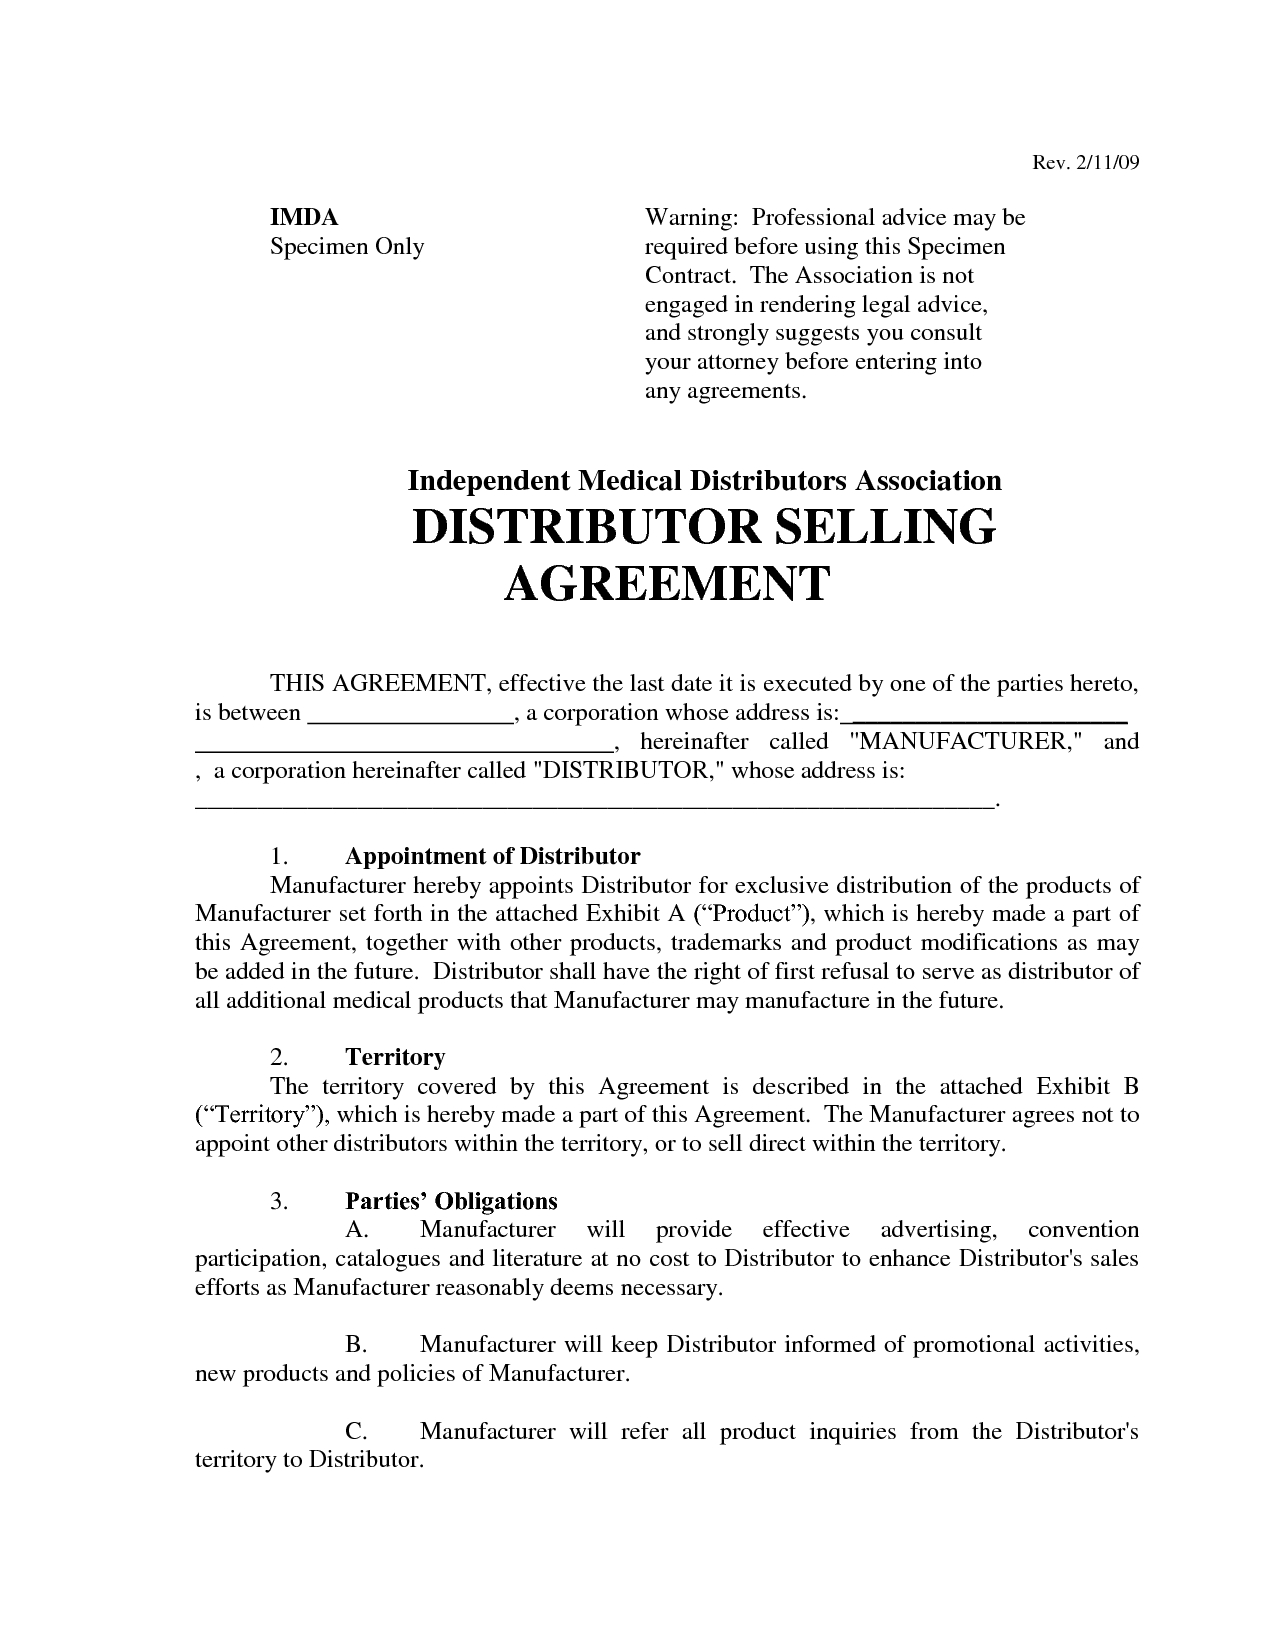 Sales And Distribution Agreement Top 5 Free Distributor Agreement Templates Word Templates Excel